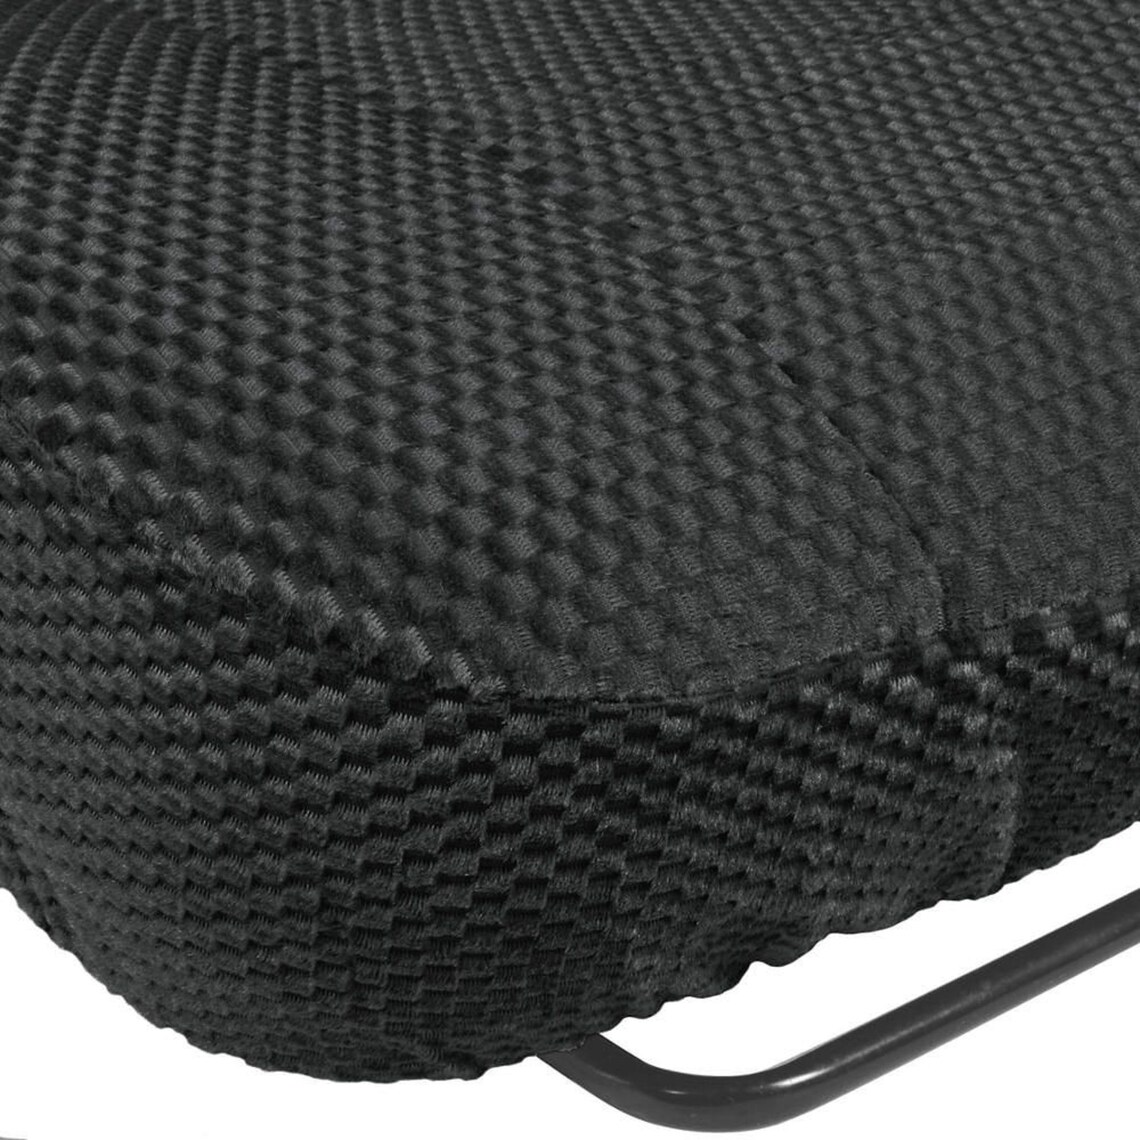 Seat Cover for Toyota Pickup 1984 - 1989 Front Solid Bench A25 Molded Headrest Small Notched Cushion (Black) - image 3 of 4